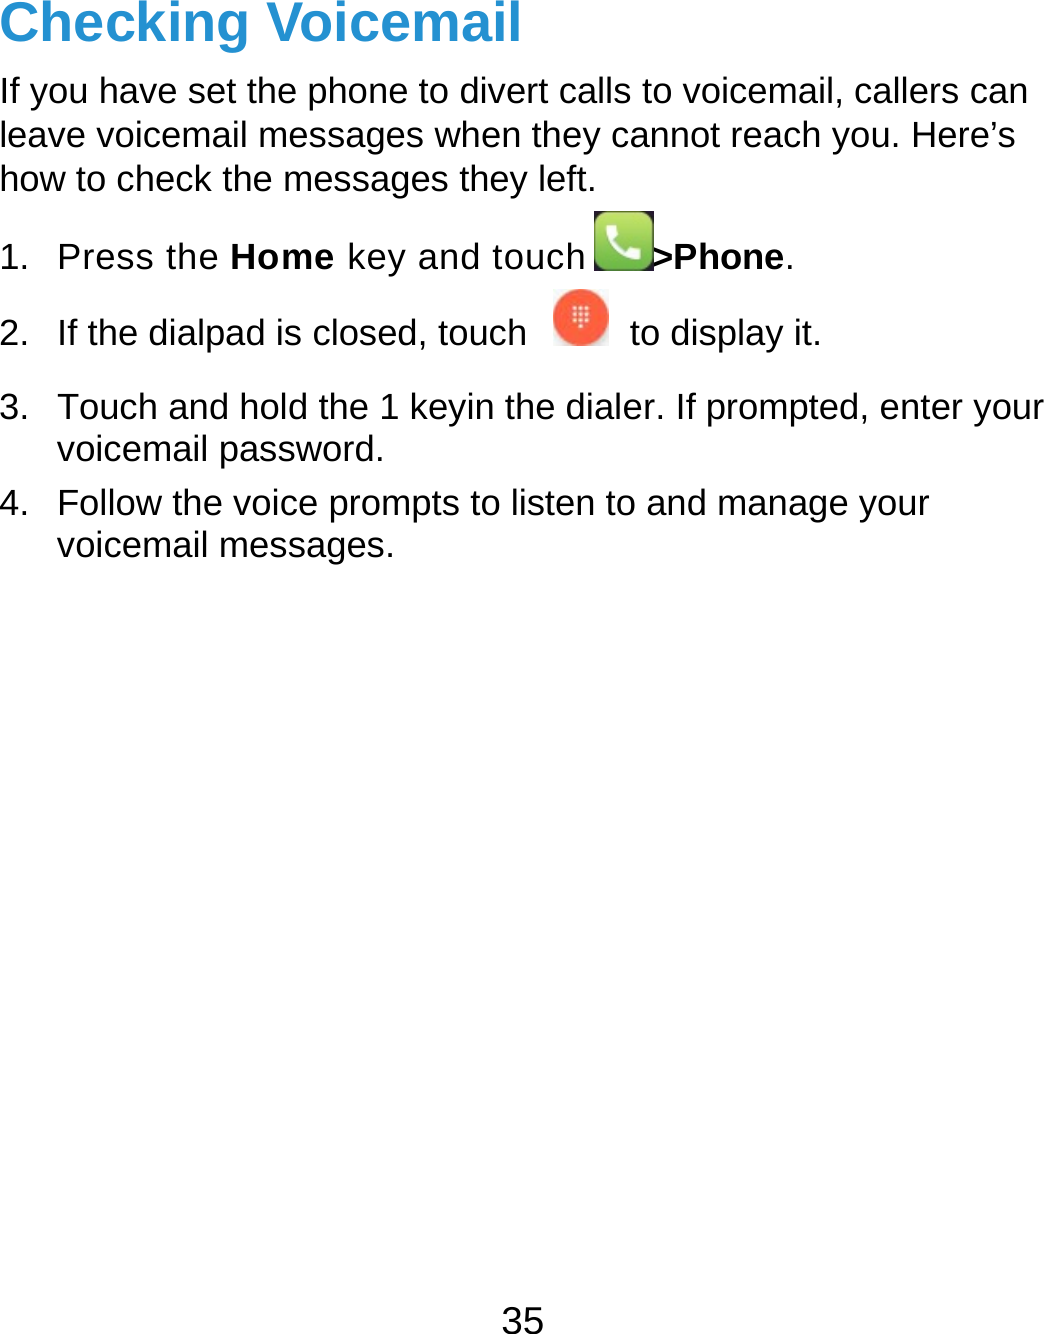  35 Checking Voicemail If you have set the phone to divert calls to voicemail, callers can leave voicemail messages when they cannot reach you. Here’s how to check the messages they left. 1. Press the Home key and touch &gt;Phone. 2.  If the dialpad is closed, touch    to display it. 3.  Touch and hold the 1 keyin the dialer. If prompted, enter your voicemail password.   4.  Follow the voice prompts to listen to and manage your voicemail messages.           